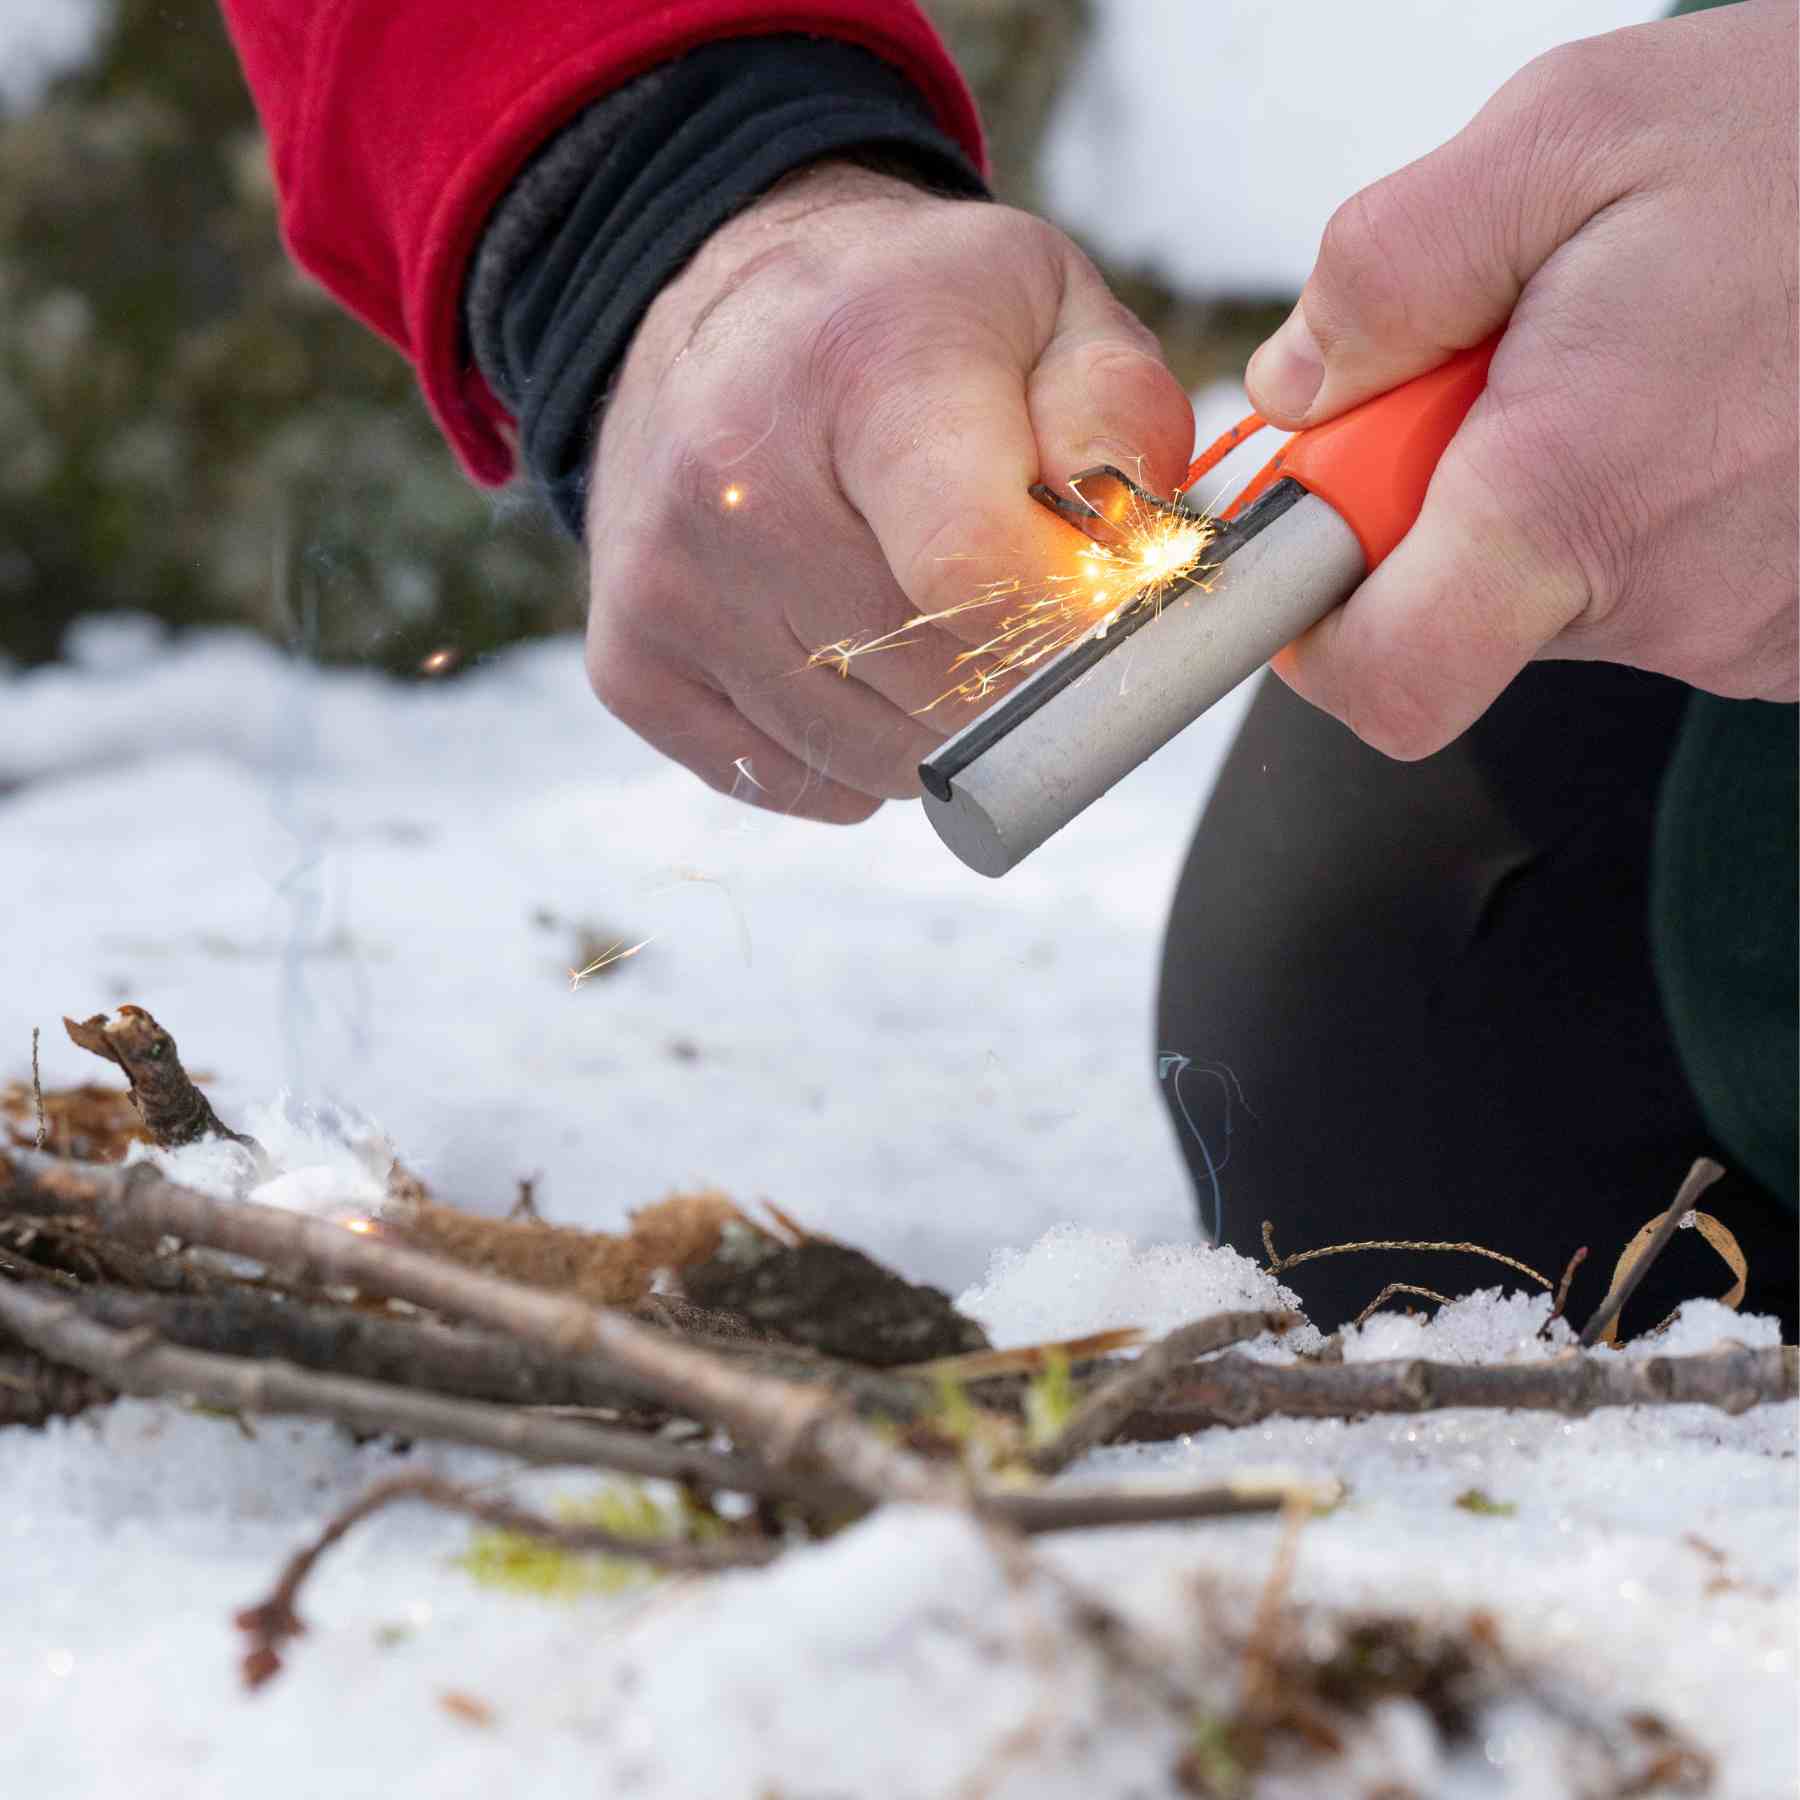 Mag Striker with Tinder Cord creating sparks over twigs on snow